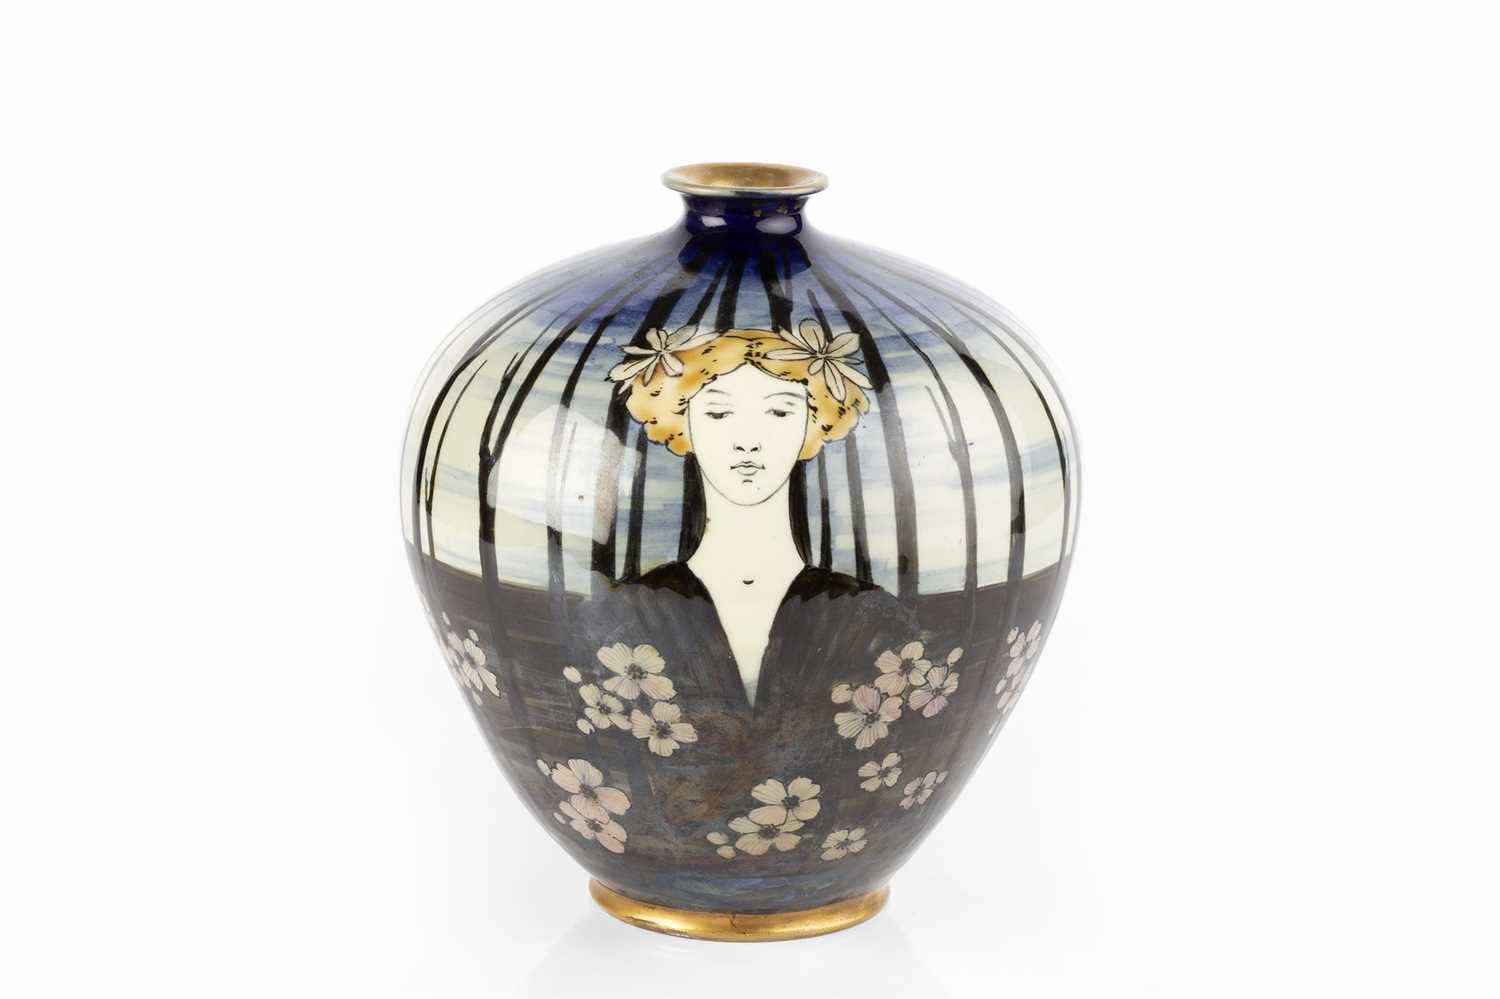 Attributed to Riessner, Stellmacher & Kessel Art Nouveau vase painted with a maiden in a forest